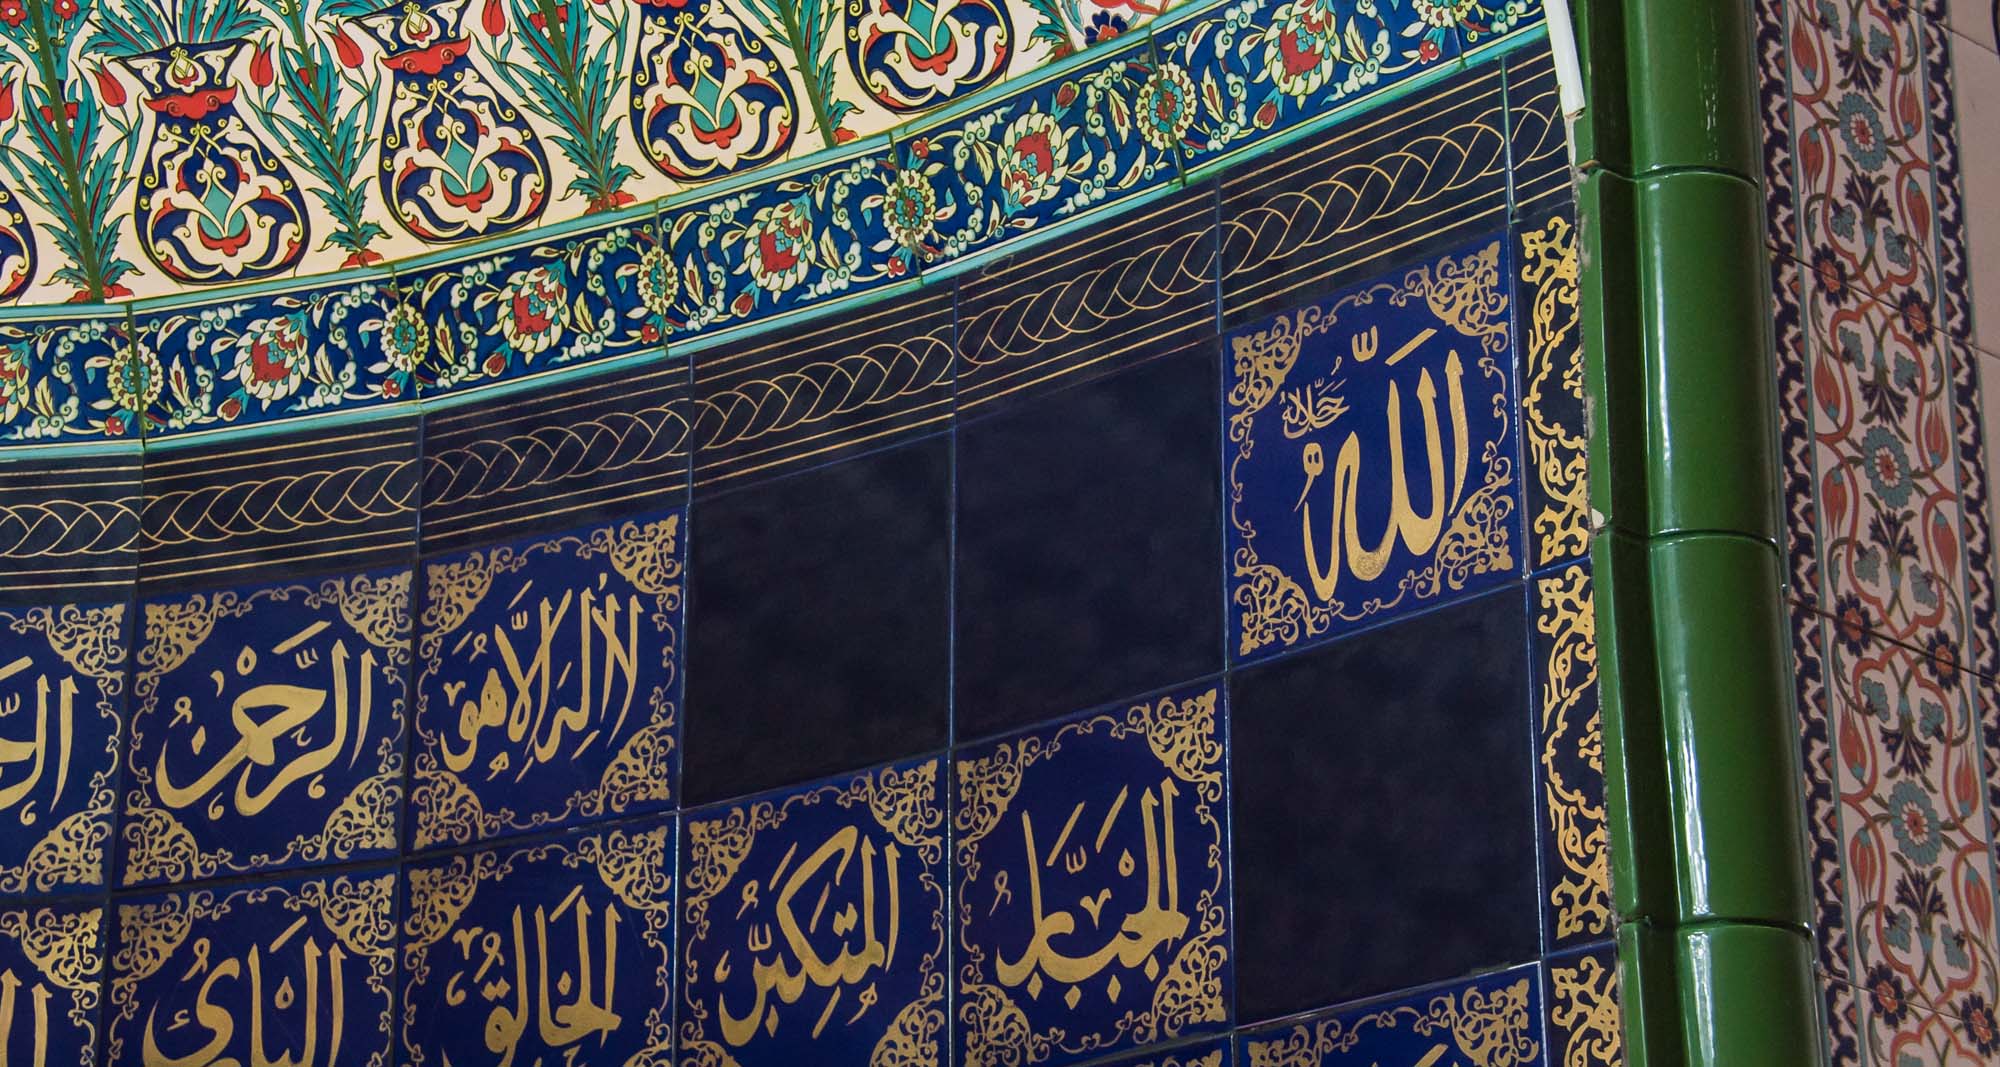 Painted tiles in the mihrab at Central Mosque. The mihrab is the semi-circular niche in a mosque that indicates the direction of Mecca - 